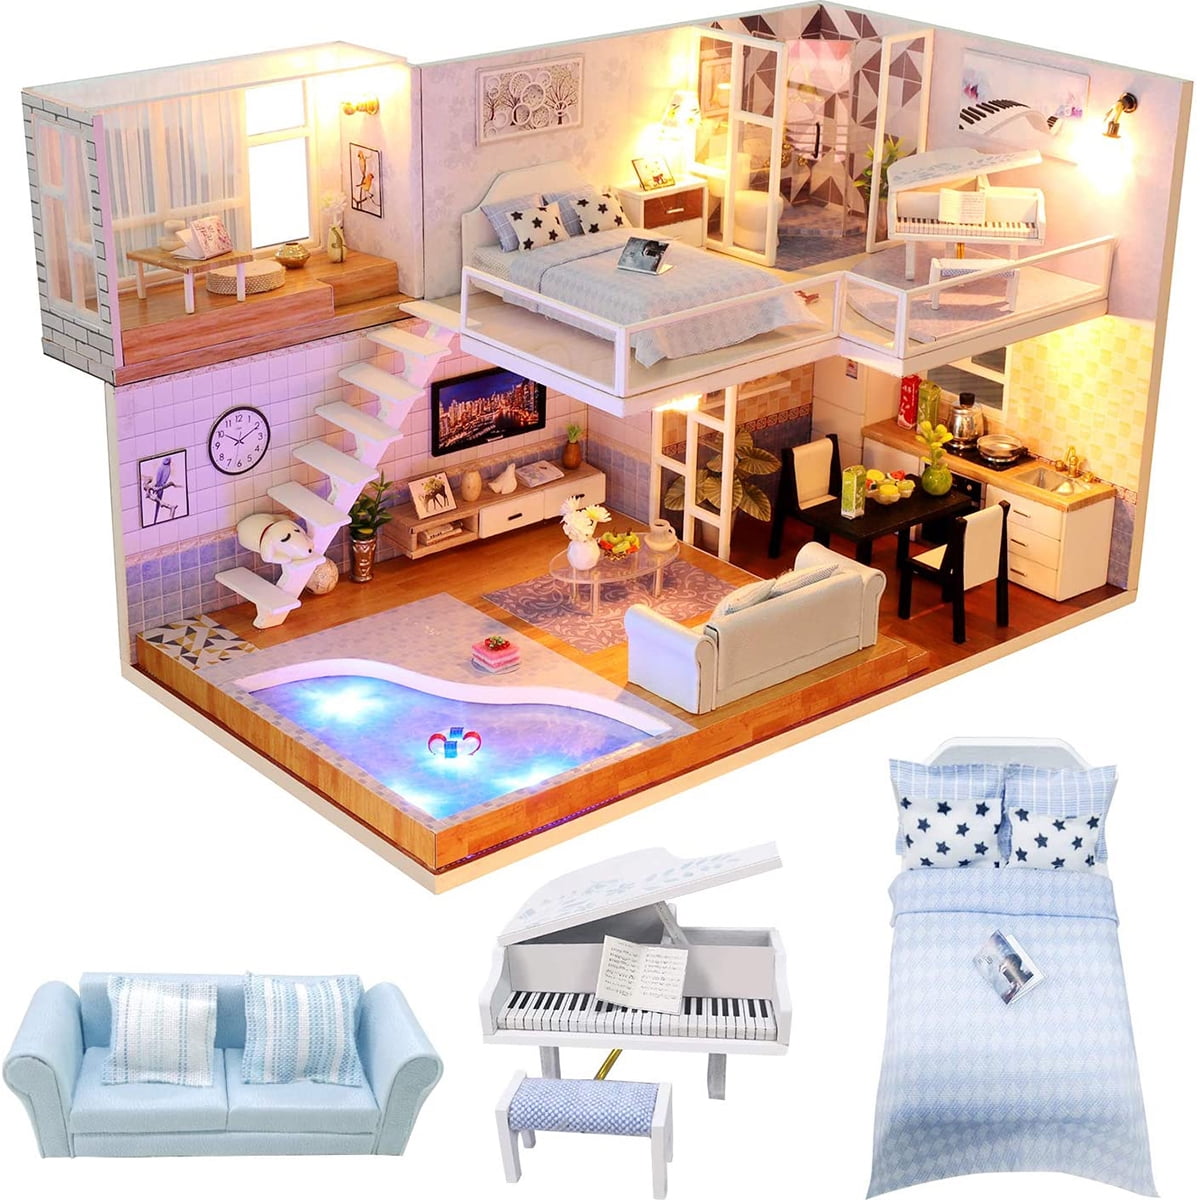 DIY Handcraft Miniature Project Wooden Dolls House My Studio Apartment In Blue